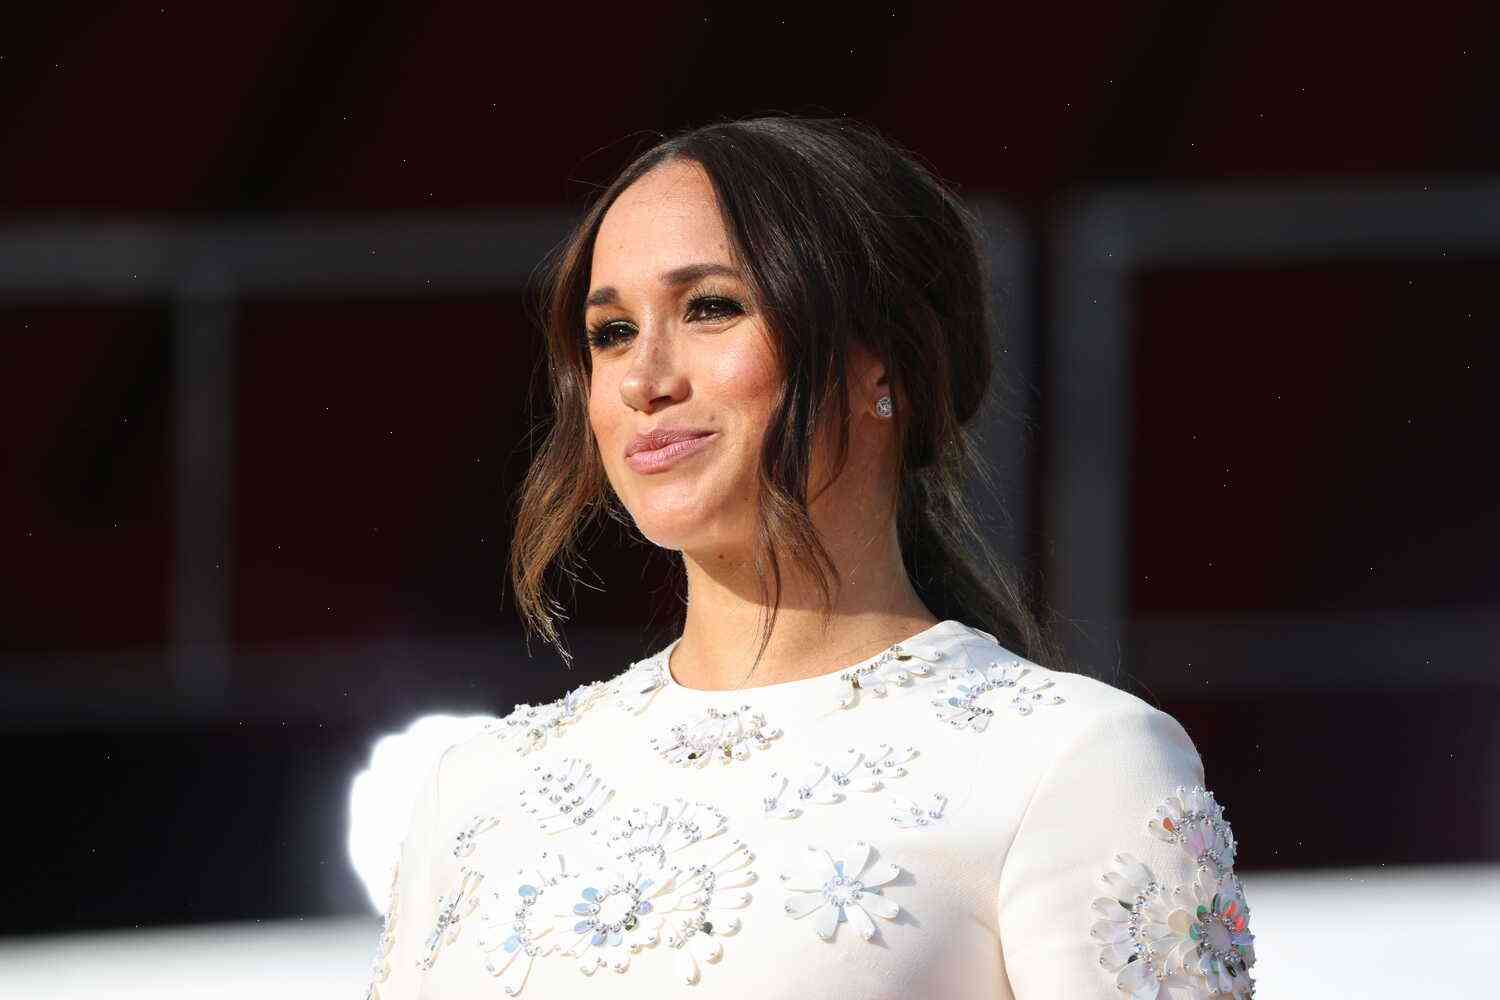 Meghan Markle settles legal battle with tabloid over baby reports